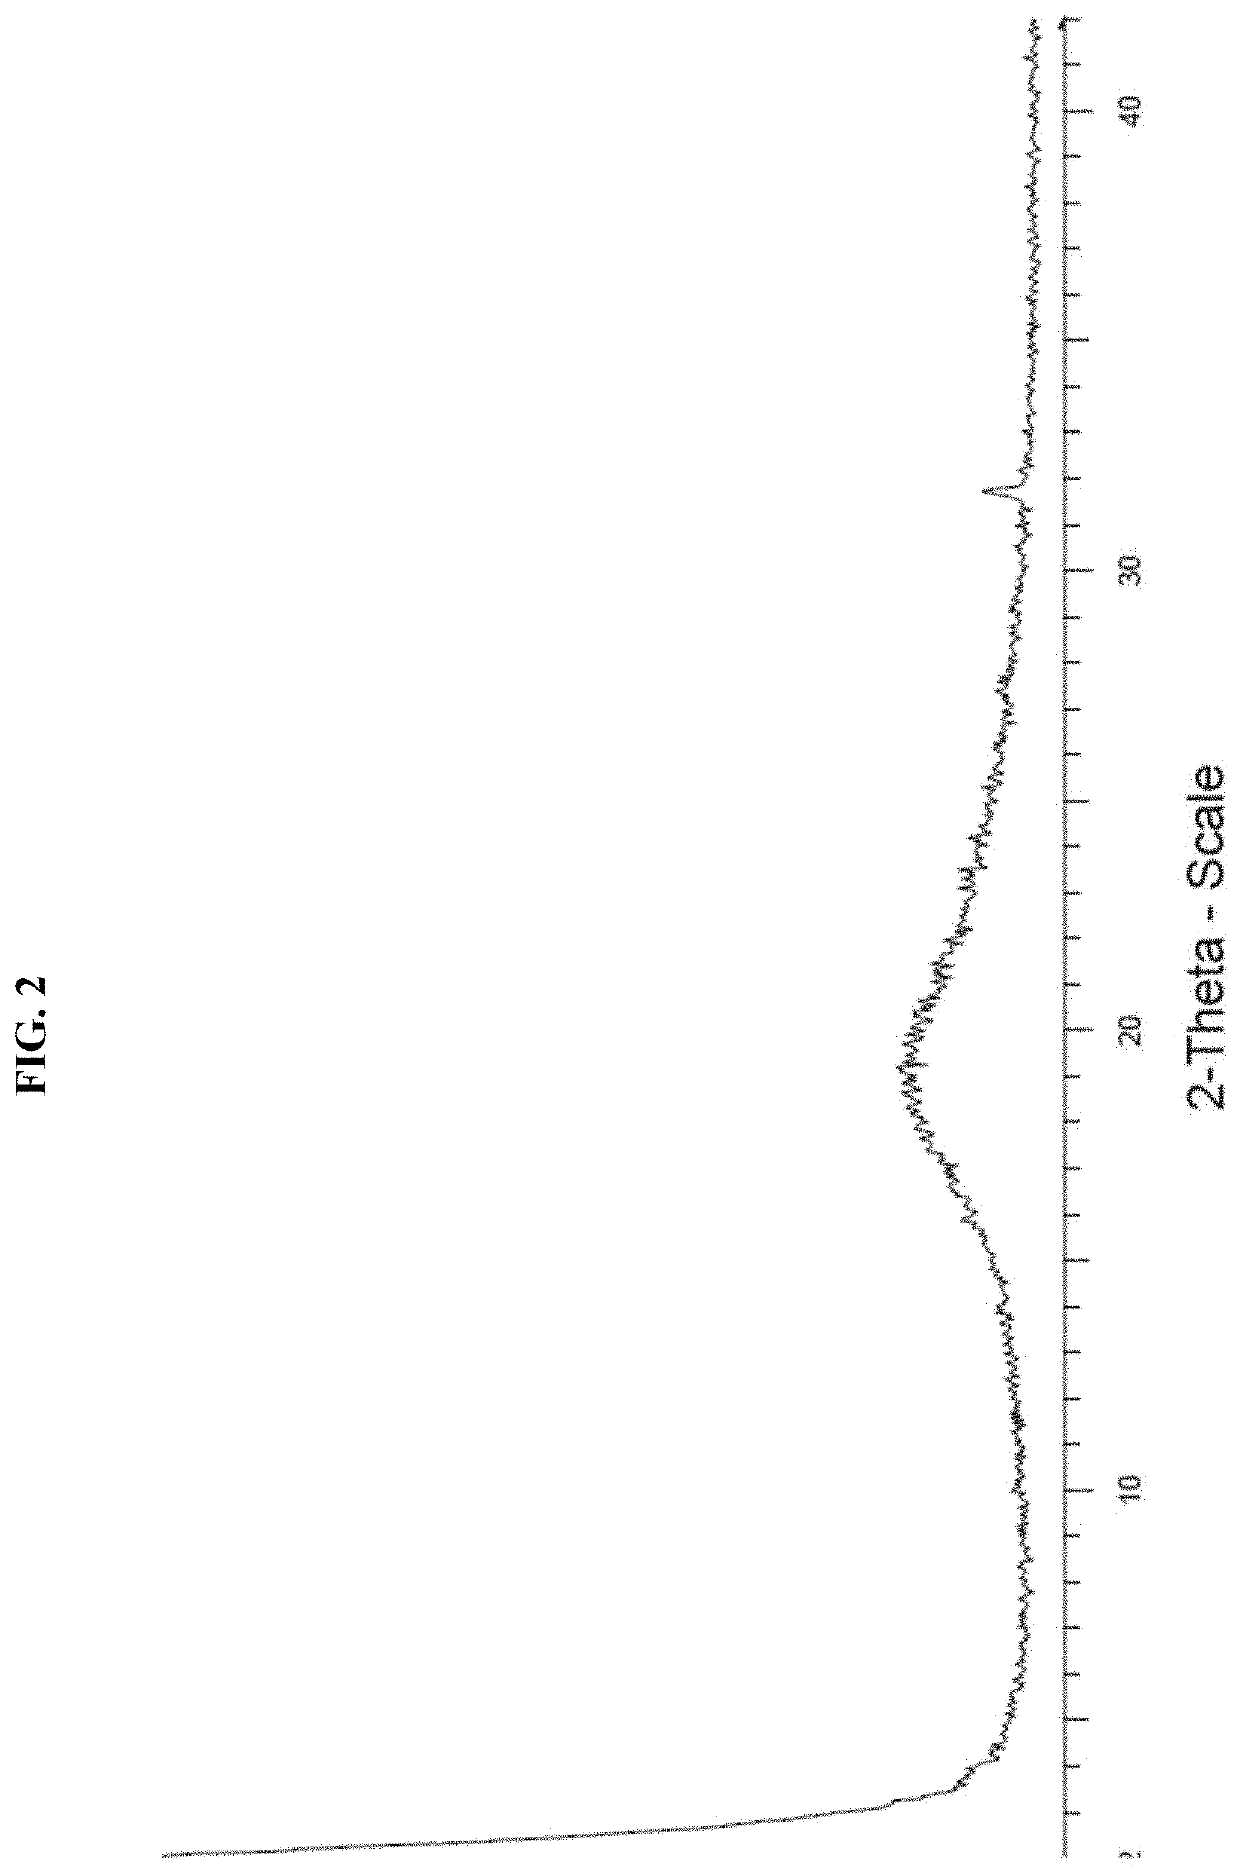 EBNA1 Inhibitor Crystalline Forms, and Methods of Preparing and Using Same